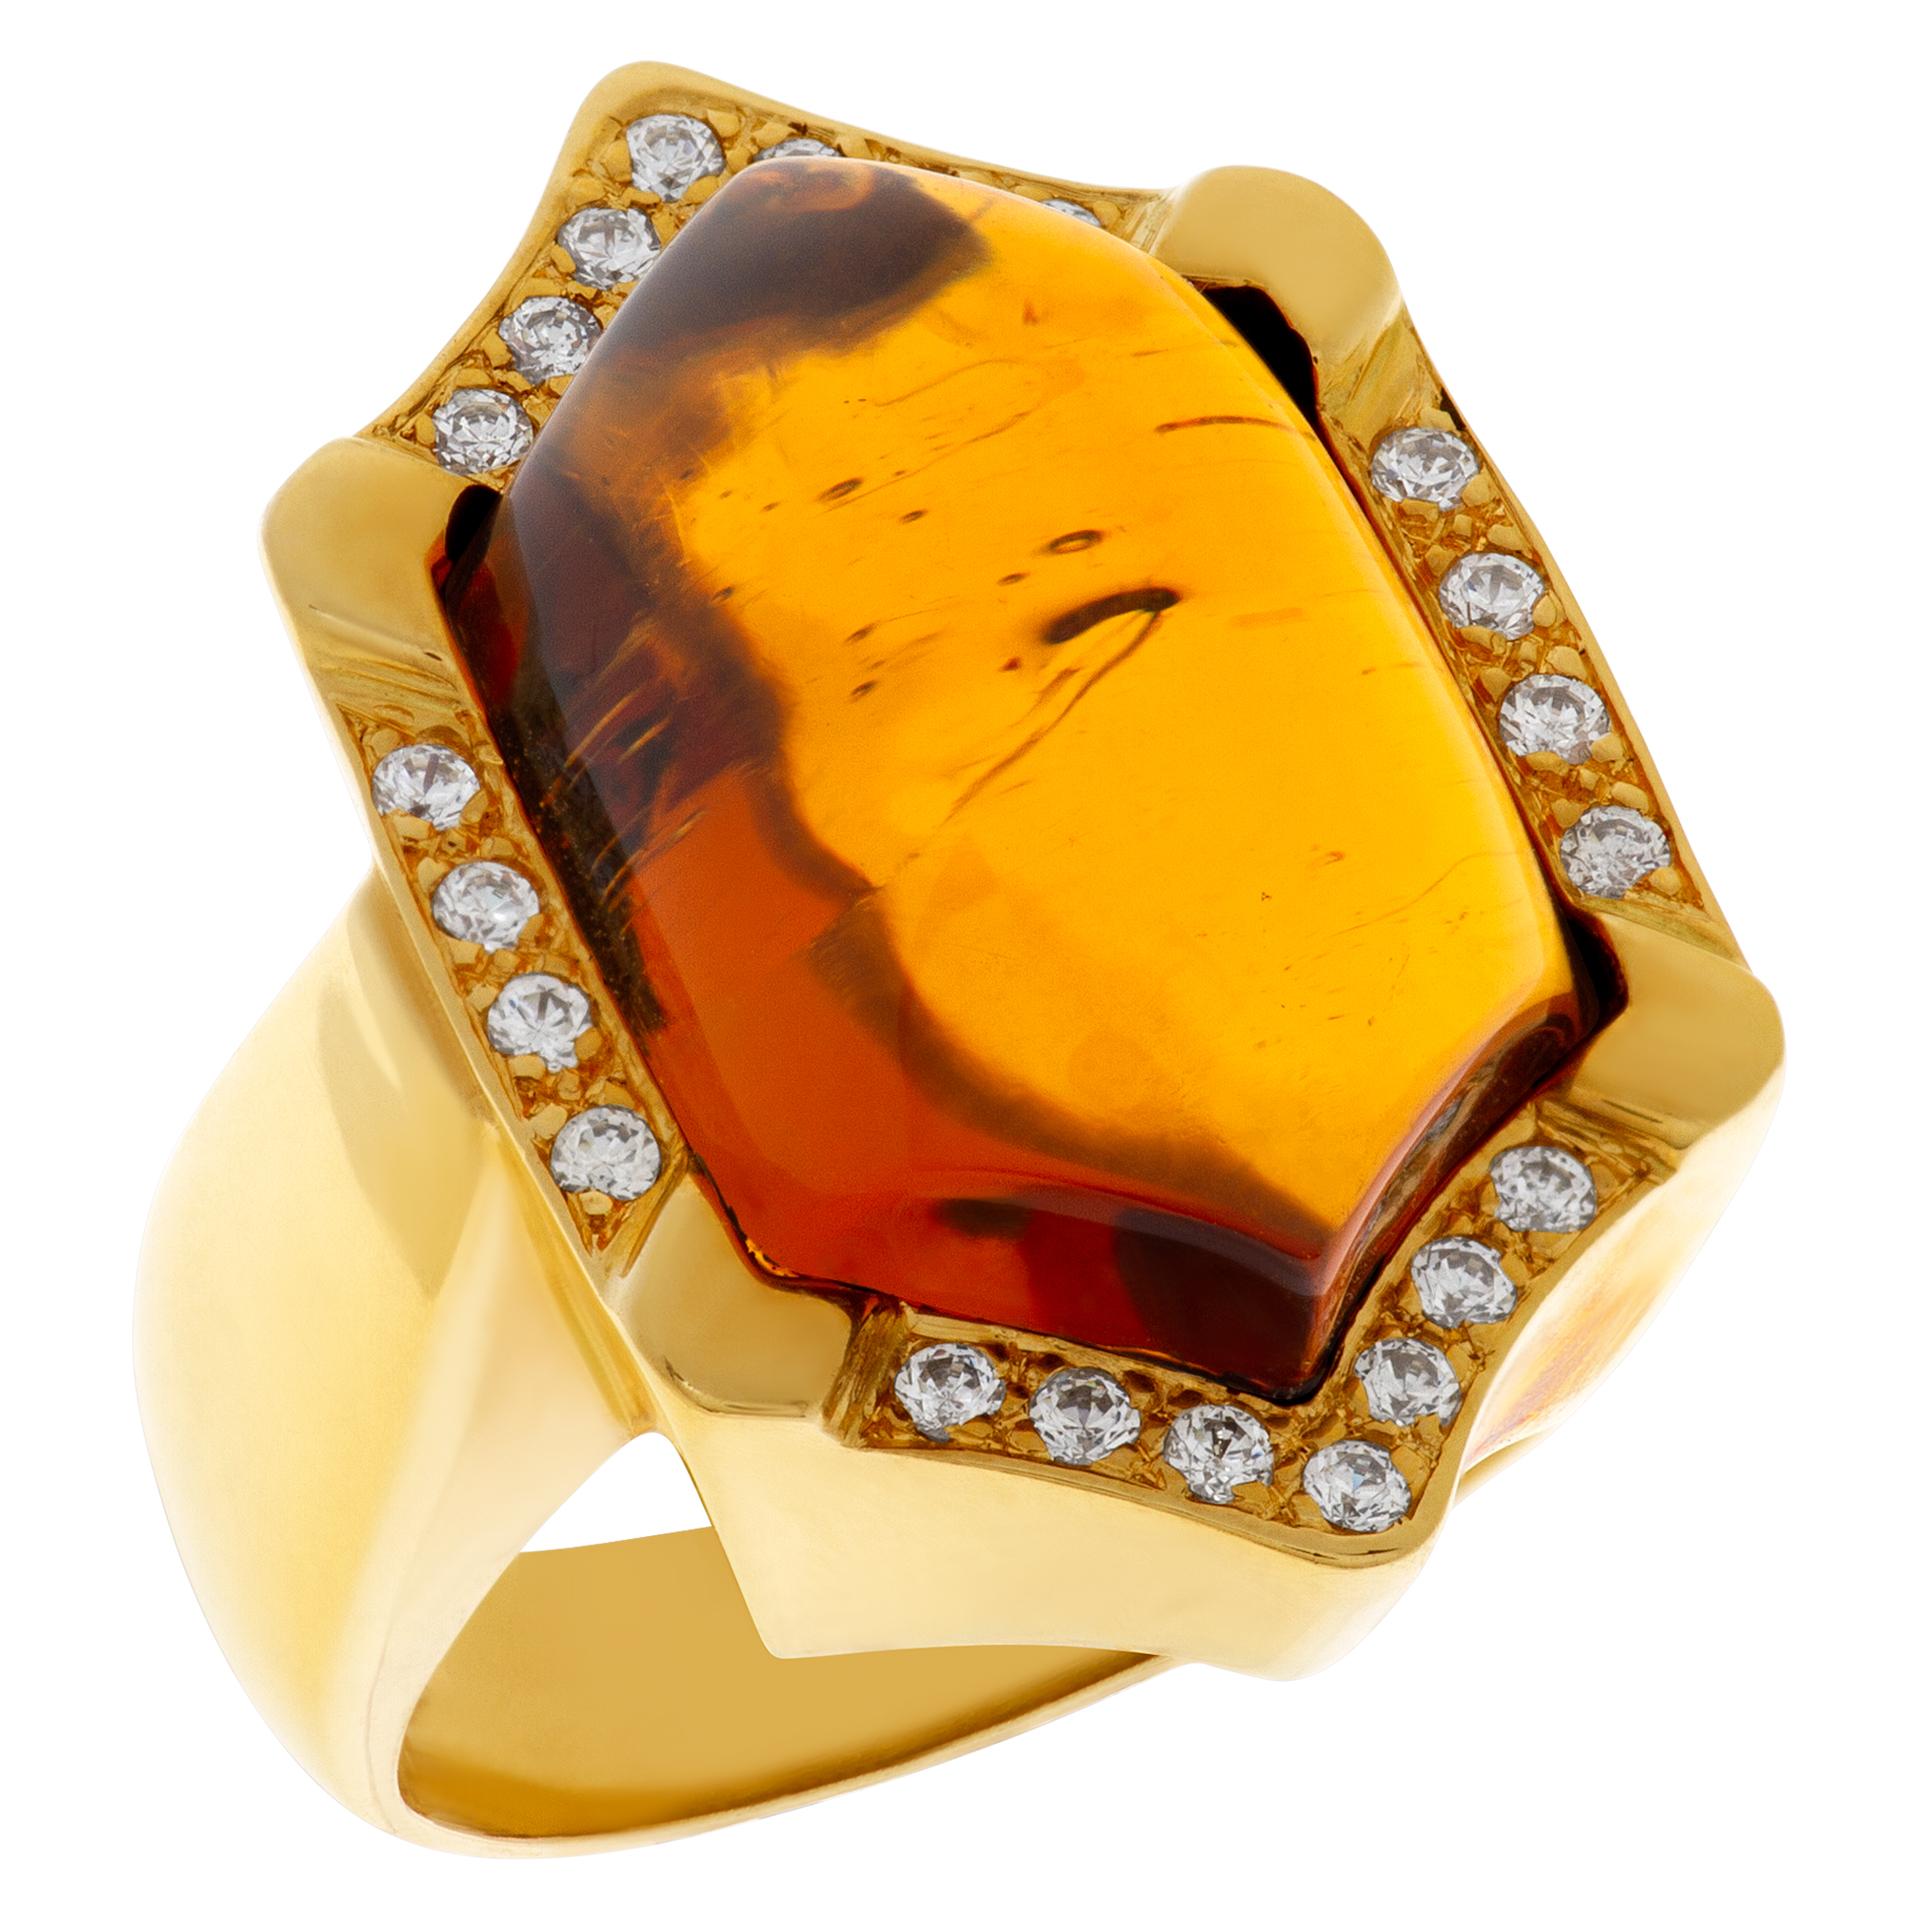 is citrine expensive